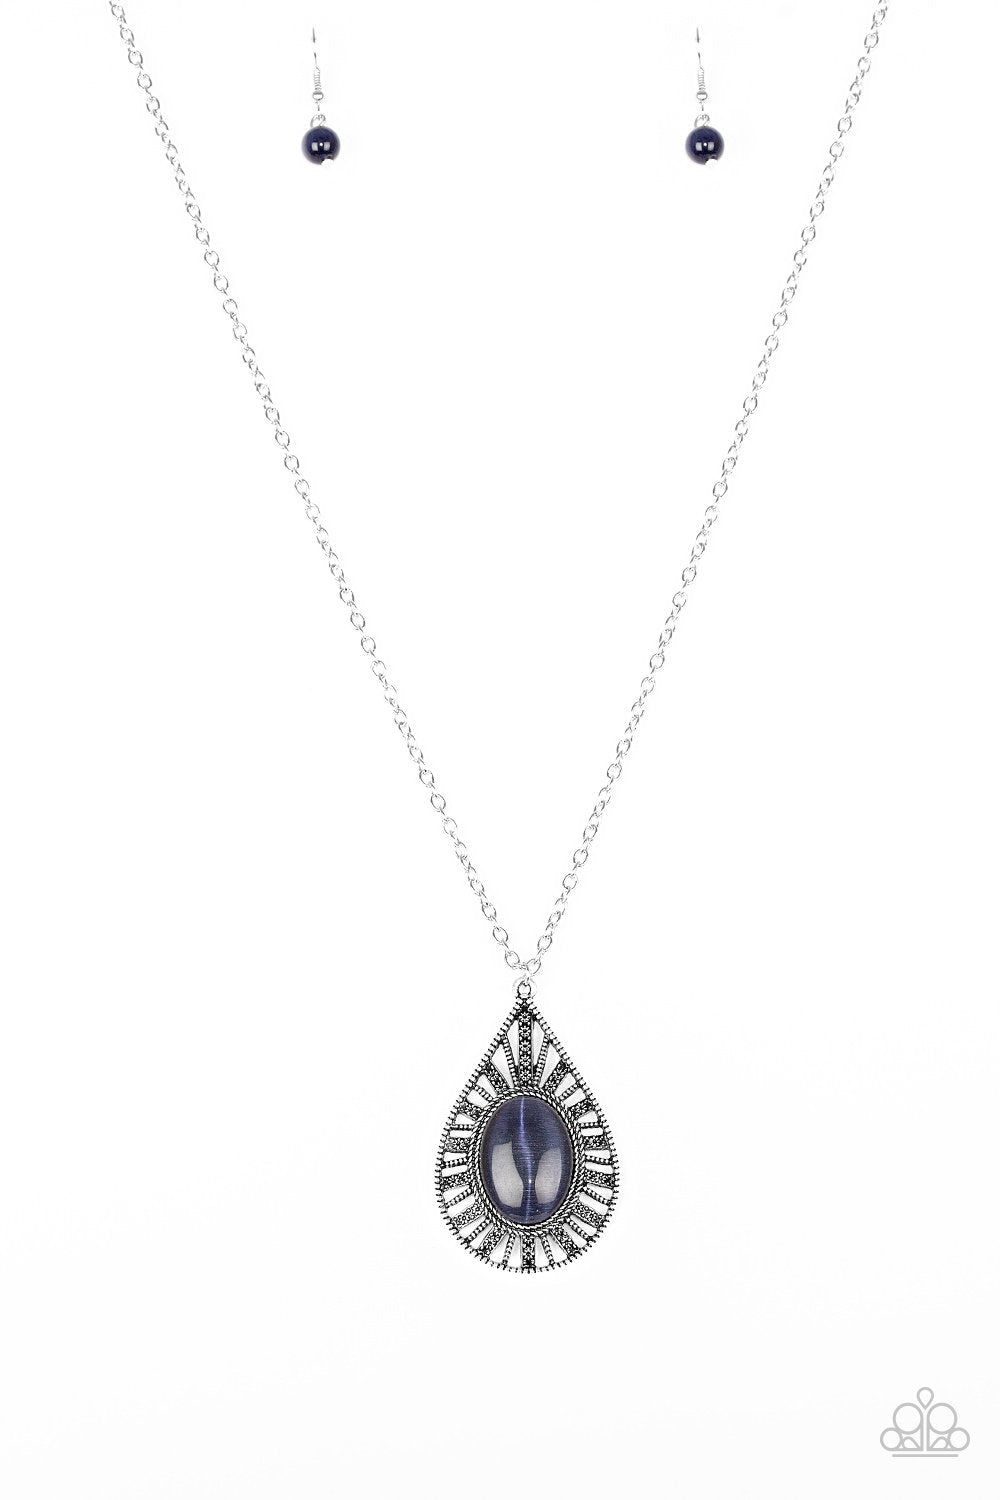 Total Tranquility Silver and Blue Moonstone Necklace - Paparazzi Accessories-CarasShop.com - $5 Jewelry by Cara Jewels